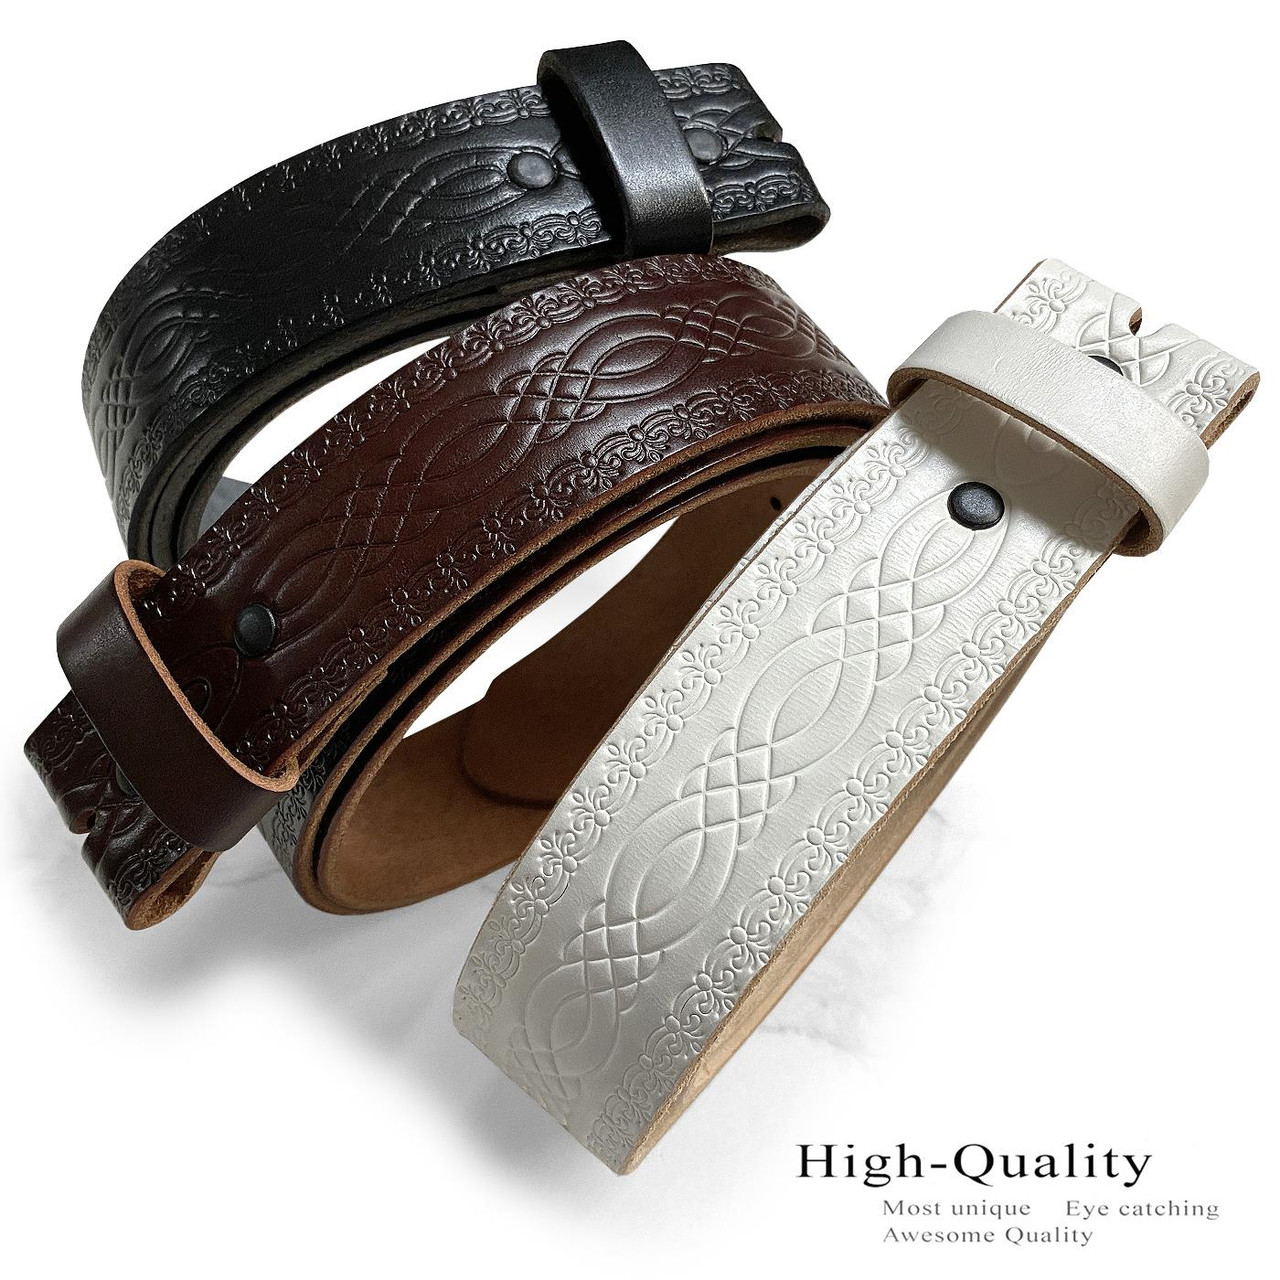 BC Belts Leather Belt Strap with Embossed Basket Weave Pattern 1.5 Wide with Snaps